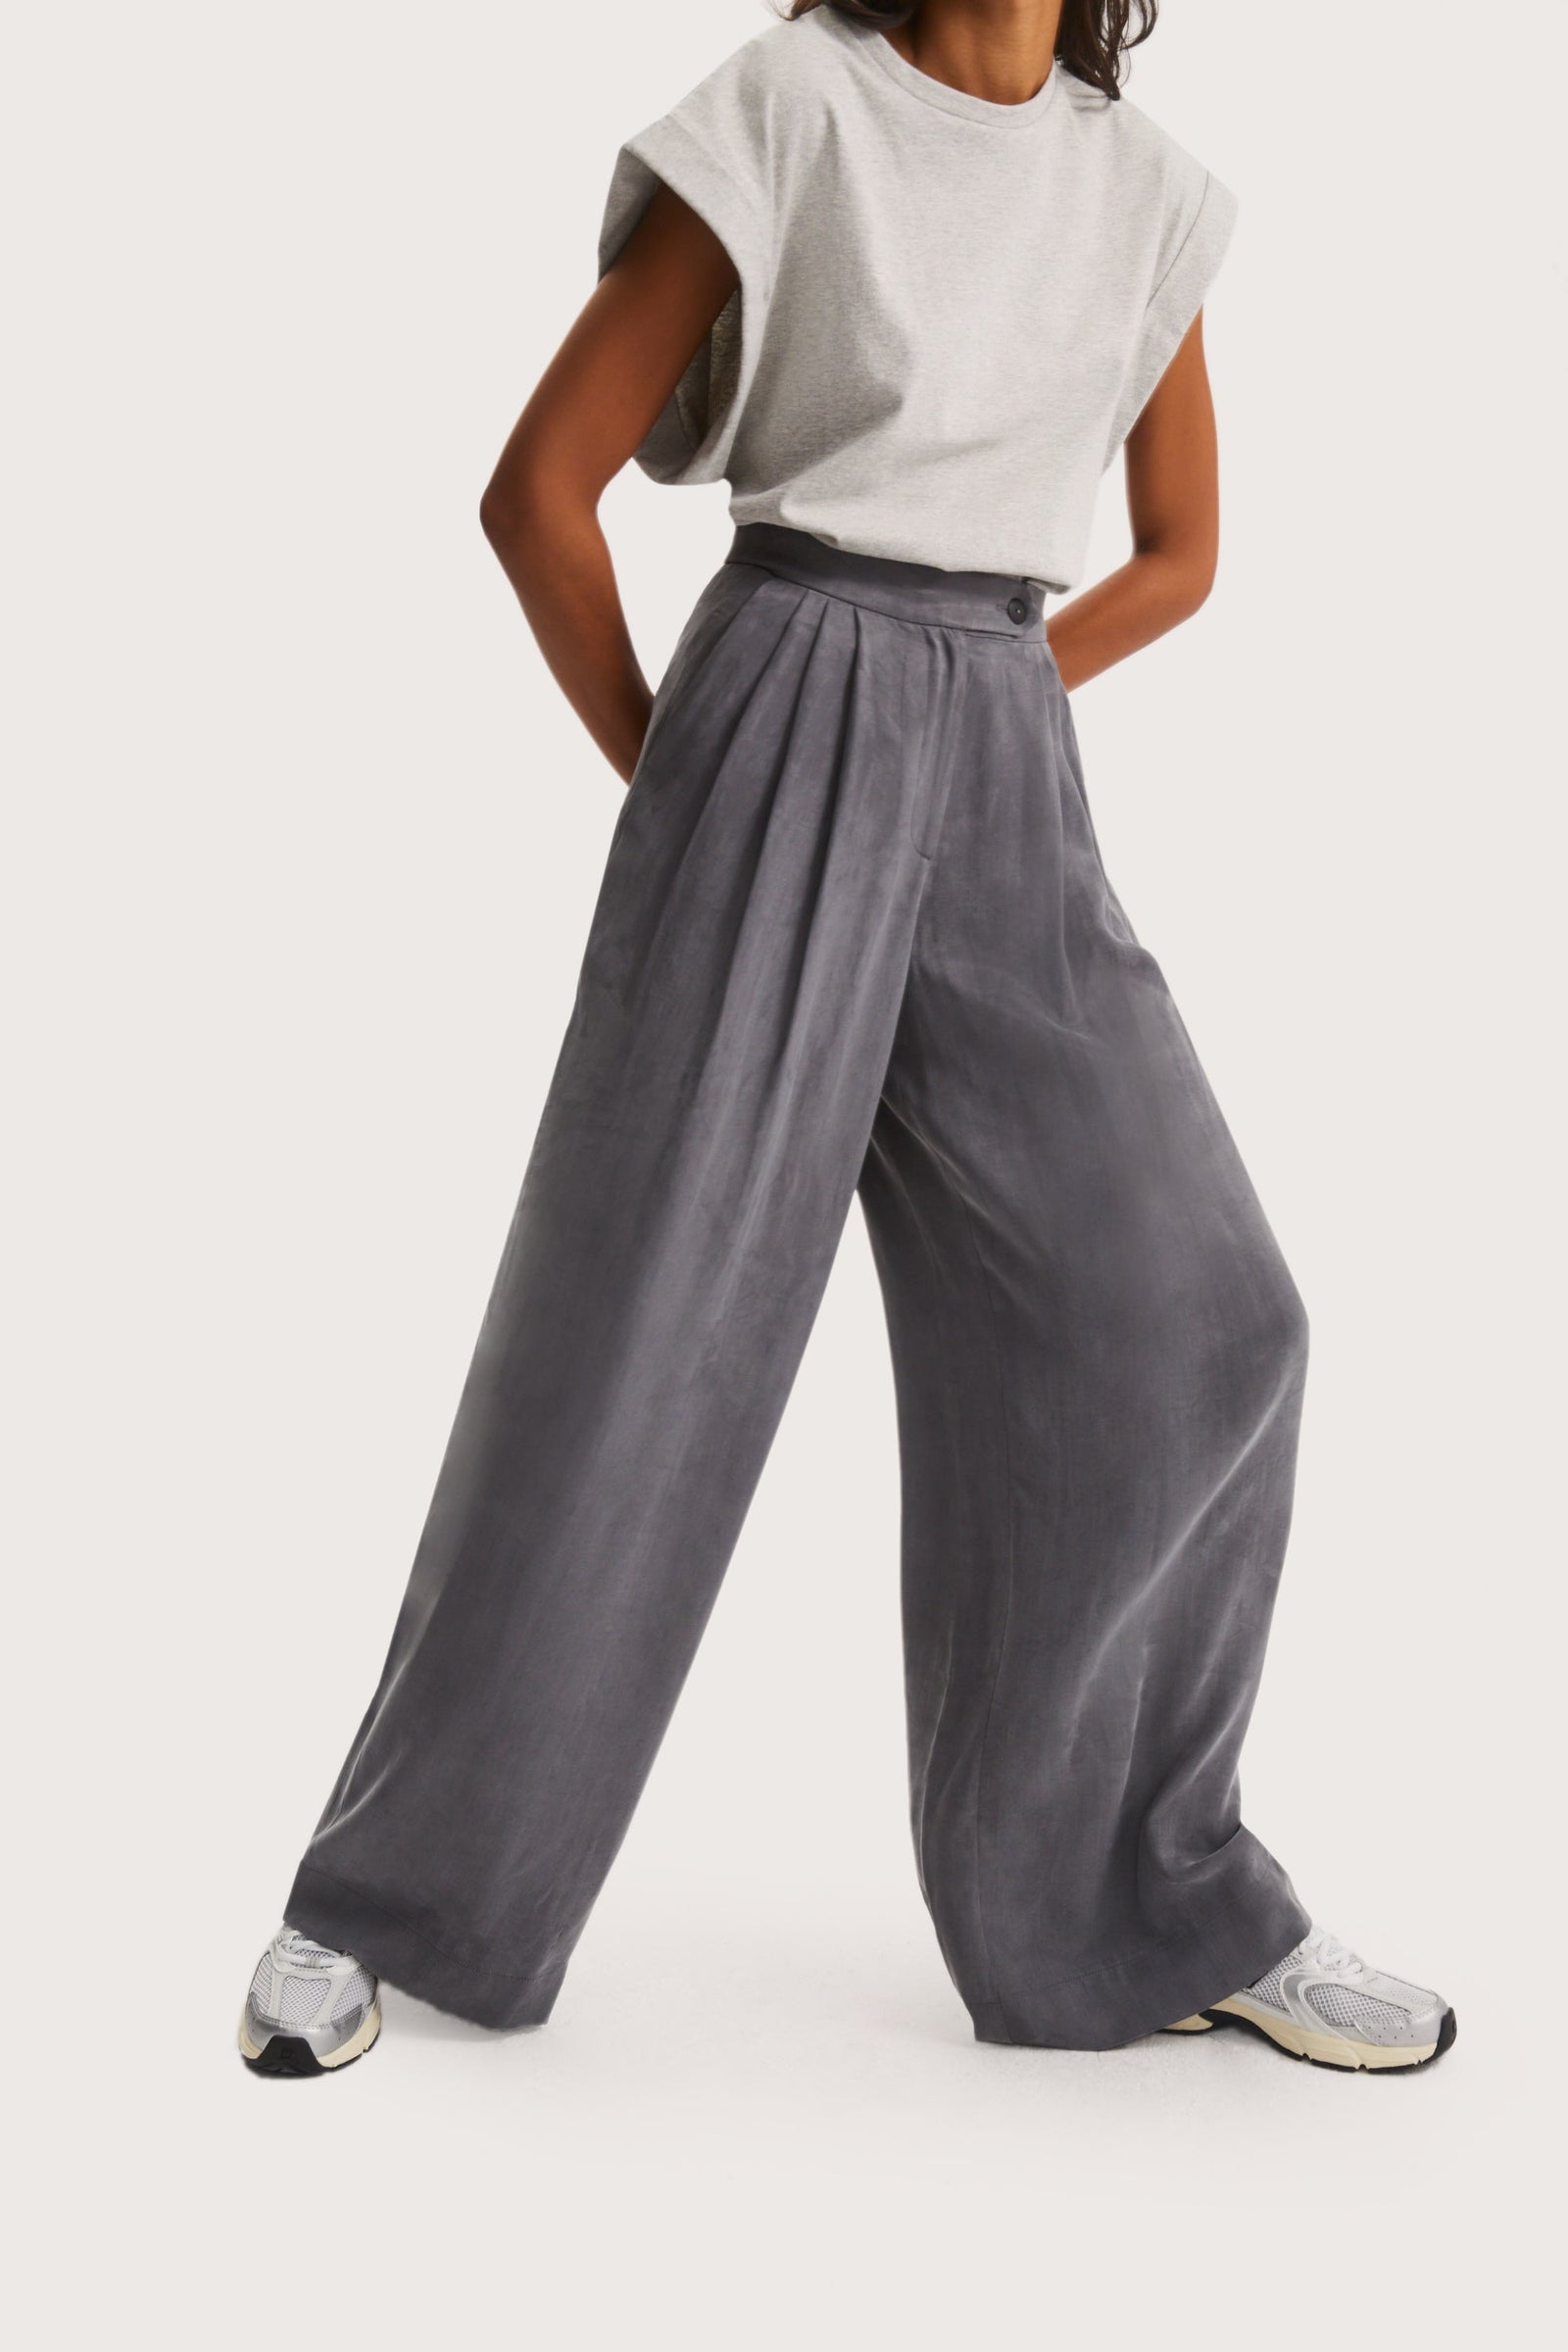 ASTAIRE PANTS
